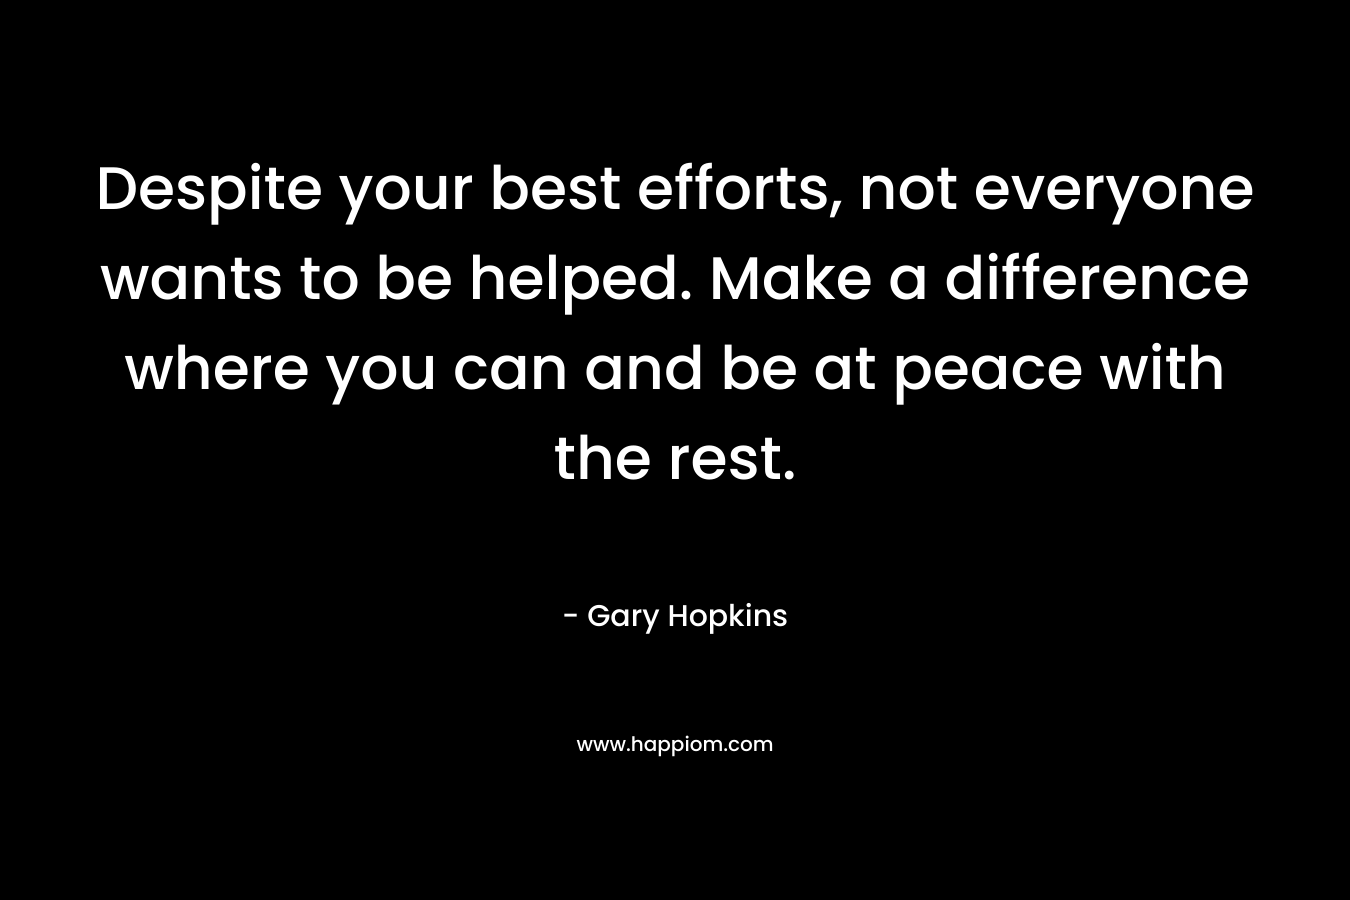 Despite your best efforts, not everyone wants to be helped. Make a difference where you can and be at peace with the rest.